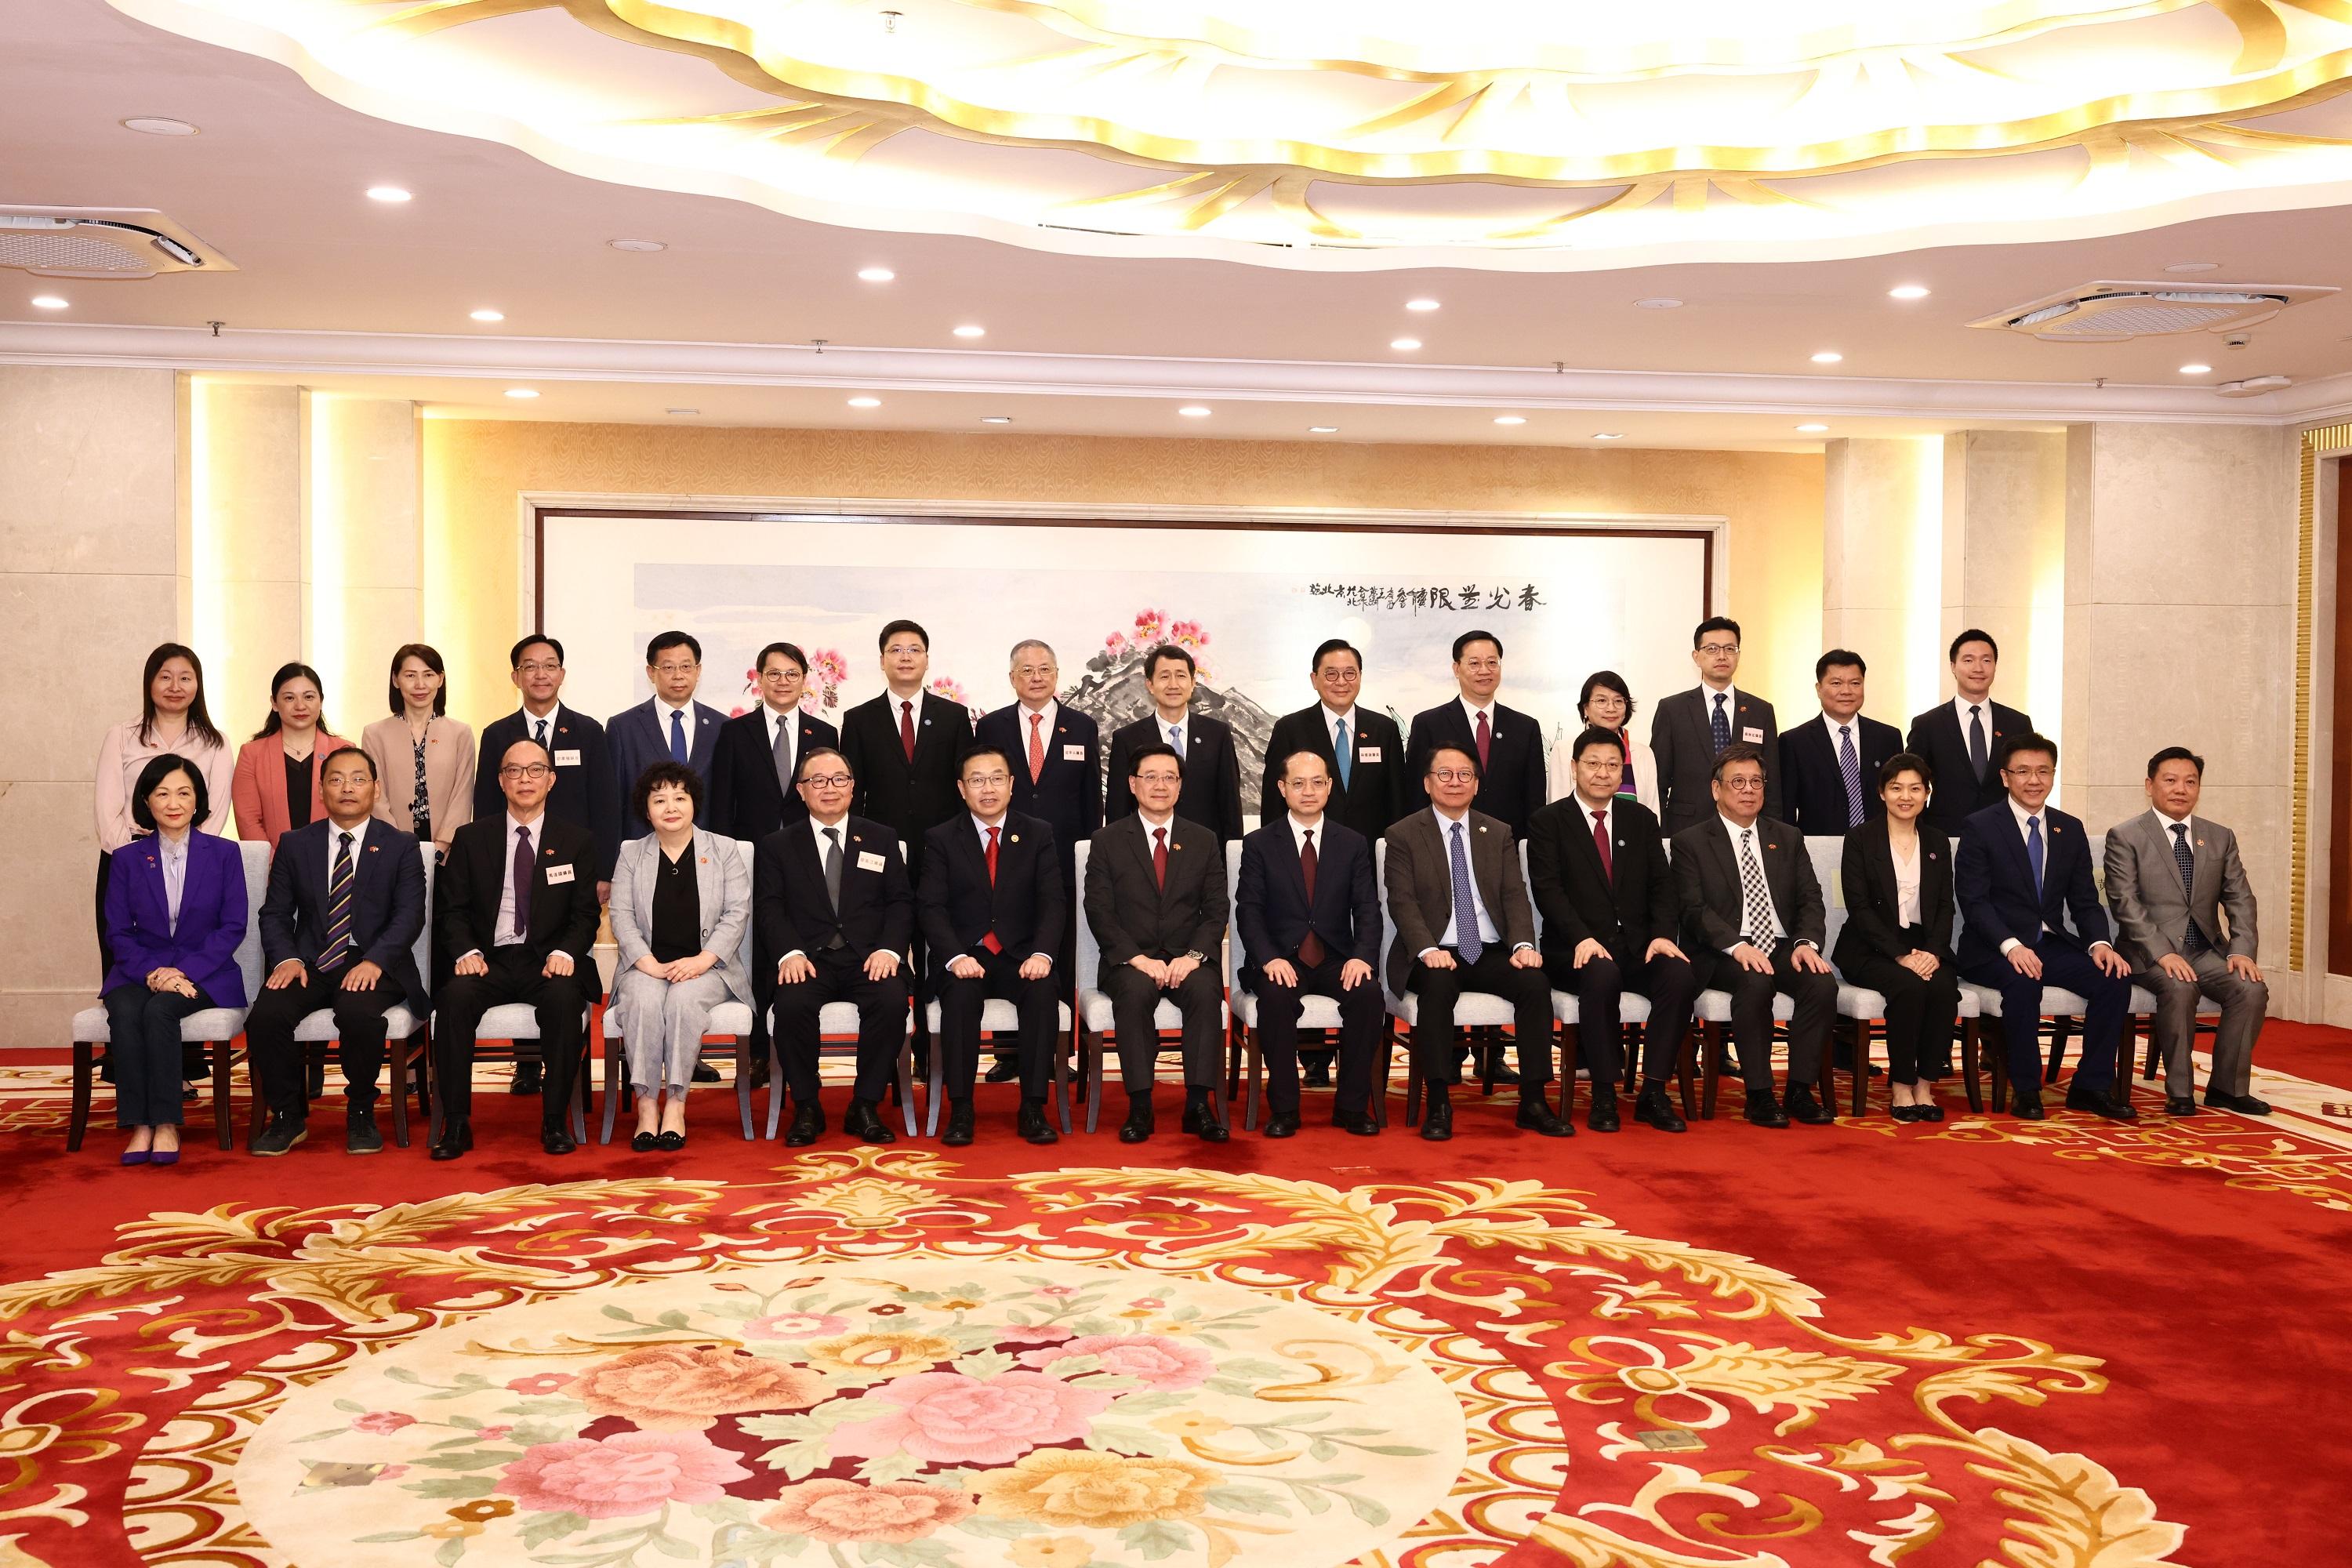 The Chief Executive, Mr John Lee, led a delegation of the Hong Kong Special Administrative Region Government and the Legislative Council (LegCo) to visit Guangdong-Hong Kong-Macao Greater Bay Area in Foshan today (April 23). Photo shows Mr Lee (seventh left); Deputy Director of the Liaison Office of the Central People's Government in the Hong Kong Special Administrative Region Mr He Jing (sixth left); the Secretary of the CPC Foshan Municipal Party Committee, Mr Zheng Ke (seventh right), Mayor of the Foshan Municipal Government, Mr Bai Tao (fifth right); the Director General of the Hong Kong and Macao Affairs Office of the People's Government of Guangdong Province, Ms Li Huanchun (fourth left); the Chief Secretary for Administration, Mr Chan Kwok-ki (sixth right); the Secretary for Commerce and Economic Development, Mr Algernon Yau (fourth right); the Secretary for Innovation, Technology and Industry, Professor Sun Dong (second right), LegCo members and other guests at the dinner with leaders of Foshan Municipal Government.